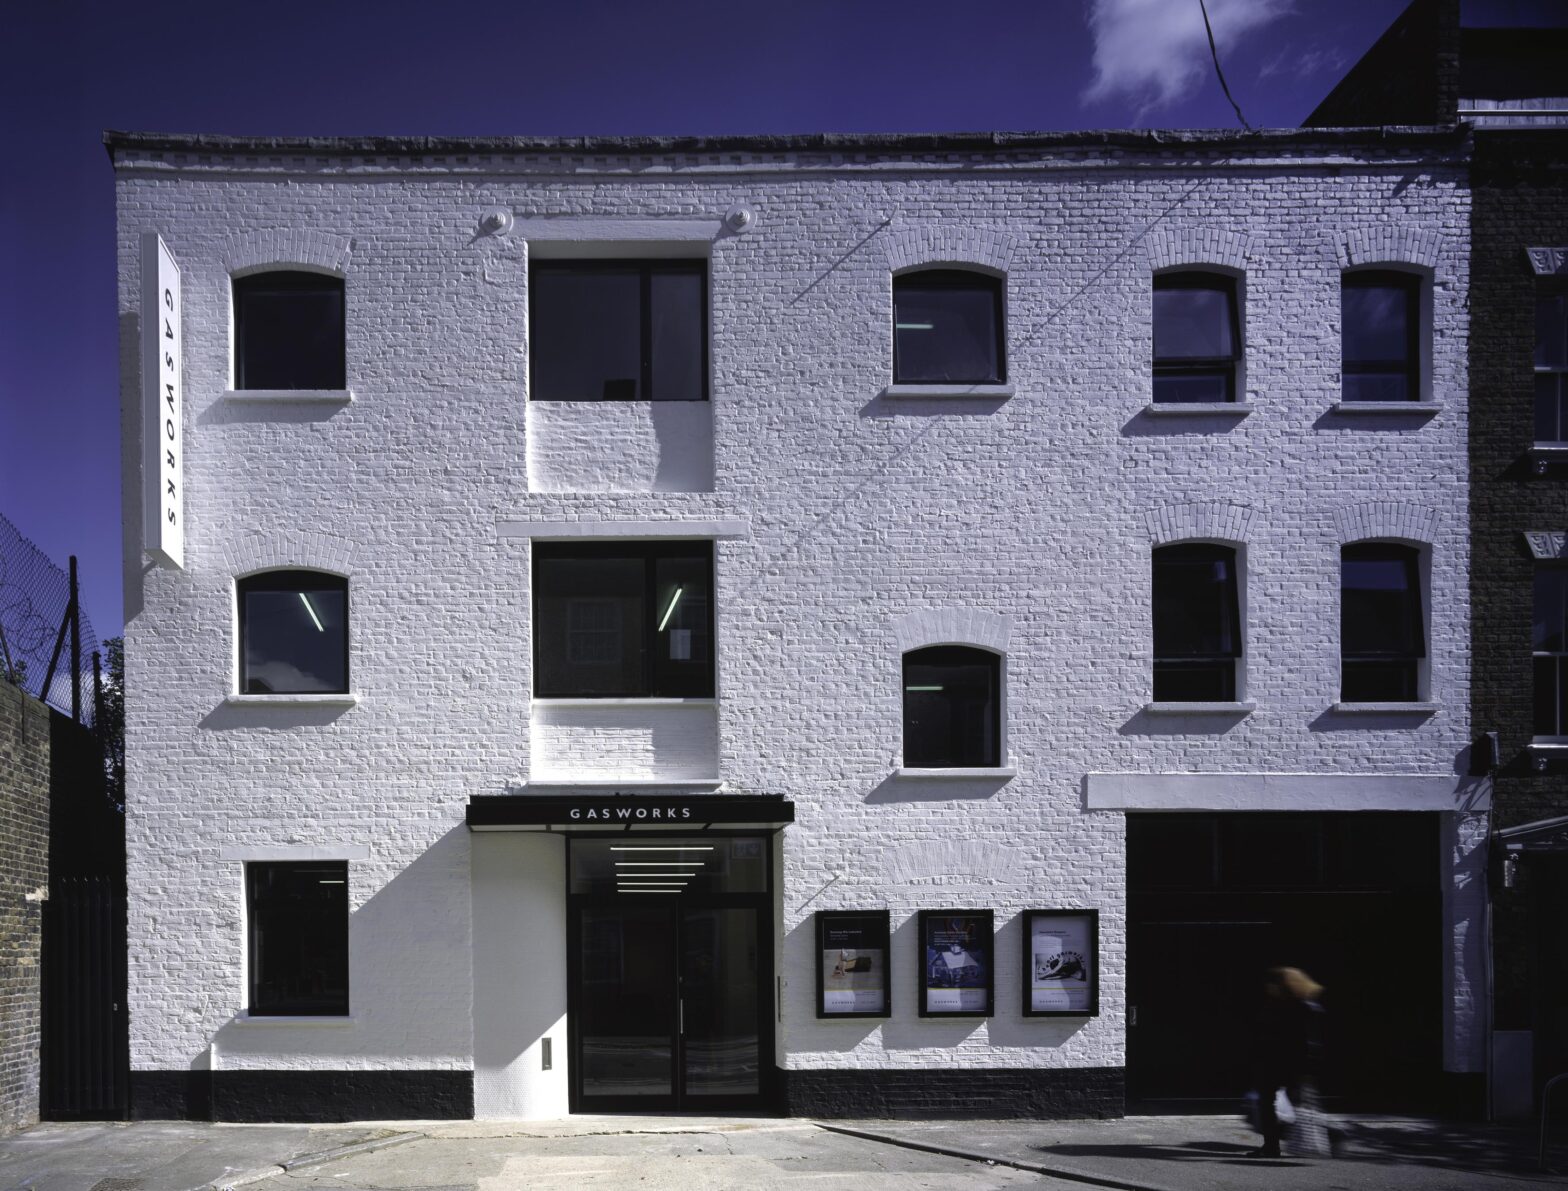 Gasworks Exterior, a 3 floor warehouse building converted for use as an art gallery and creative spaces, painted white.